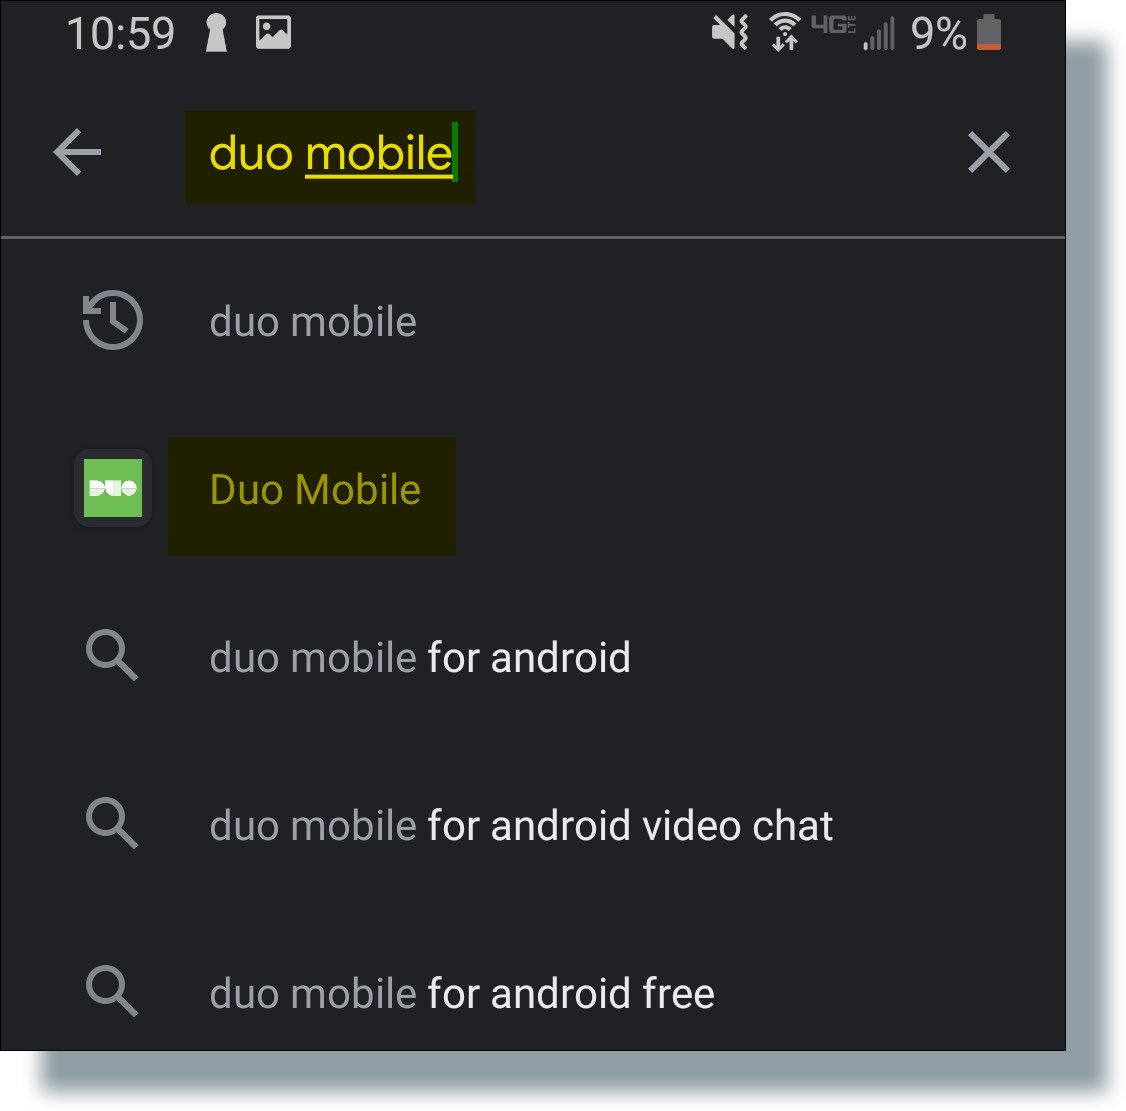 Enter 'duo mobile' in search box and then select 'Duo Mobile' from search results